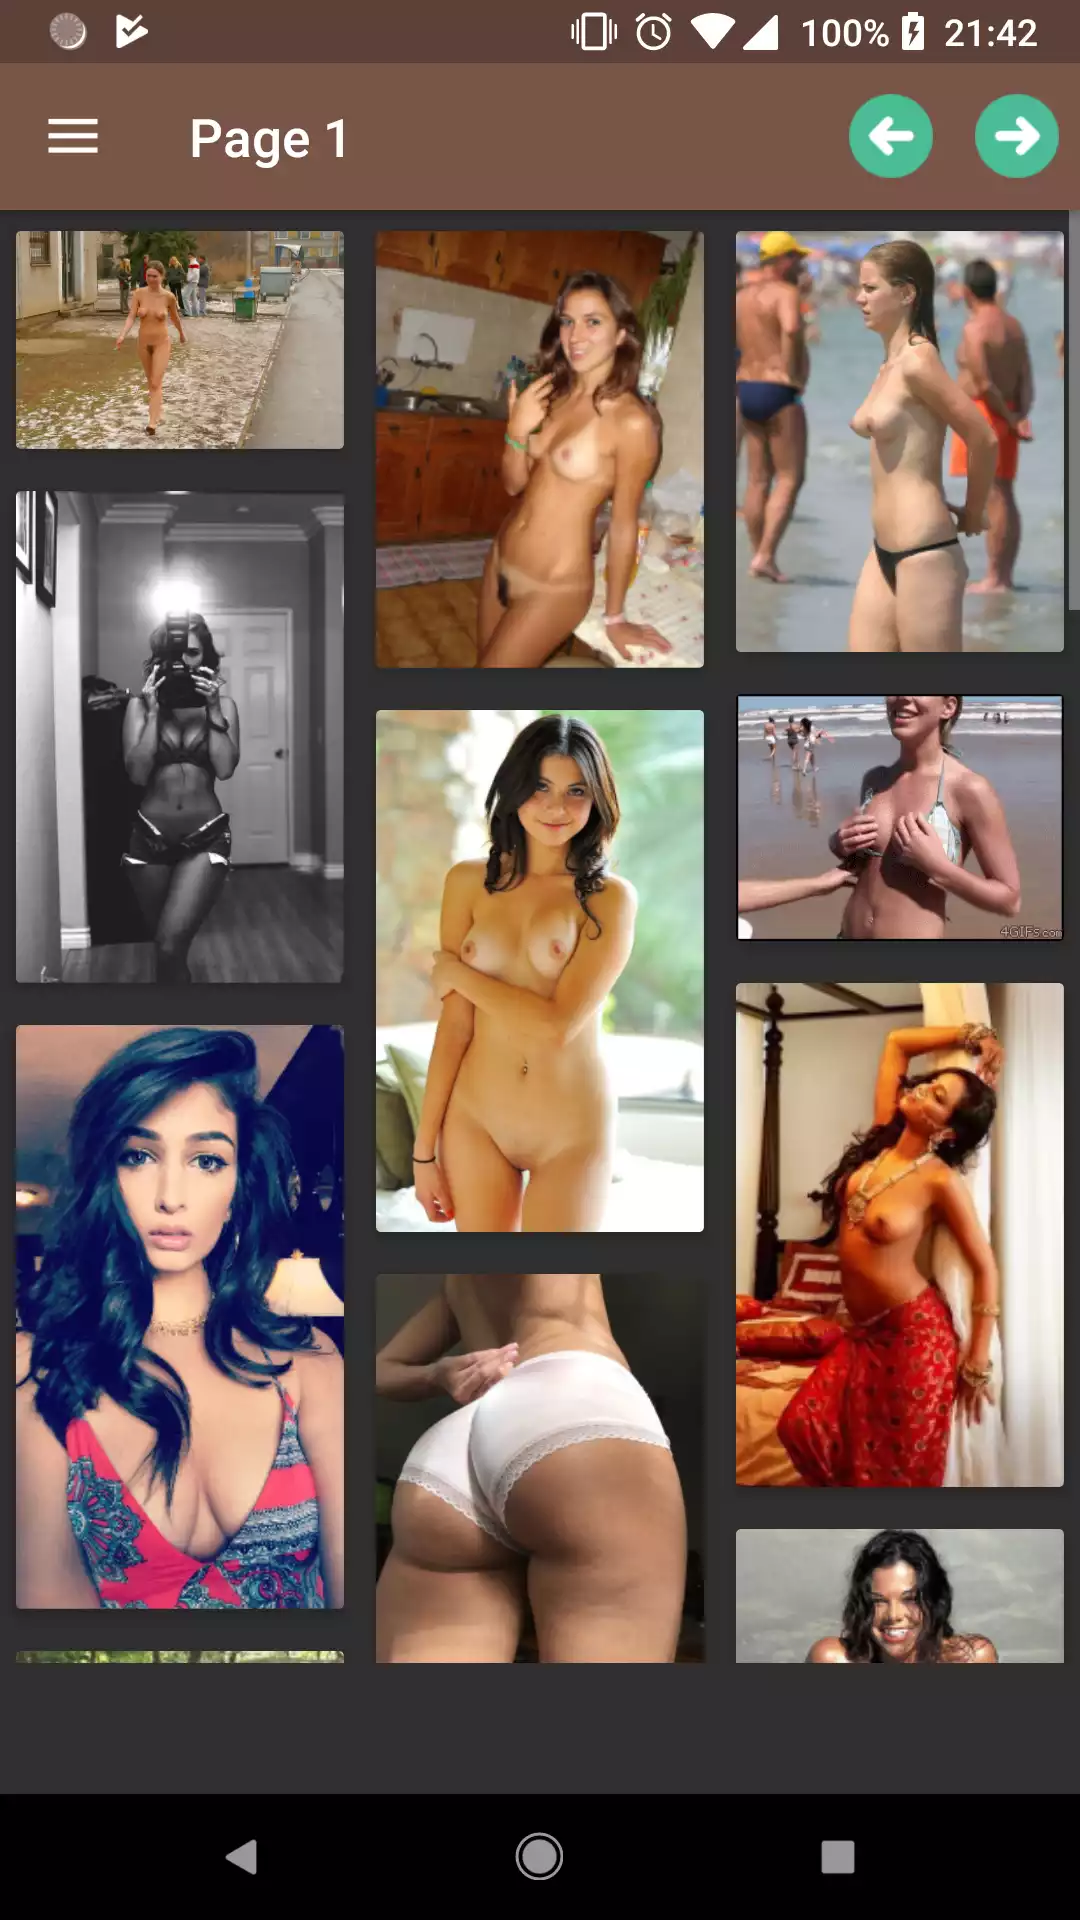 Spring Break Photos for,free,apps,pic,erotic,hot,spring,nhentai,star,pics,break,sissy,amateur,apk,app,photos,android,porn,sexy,hentai,gallery,best